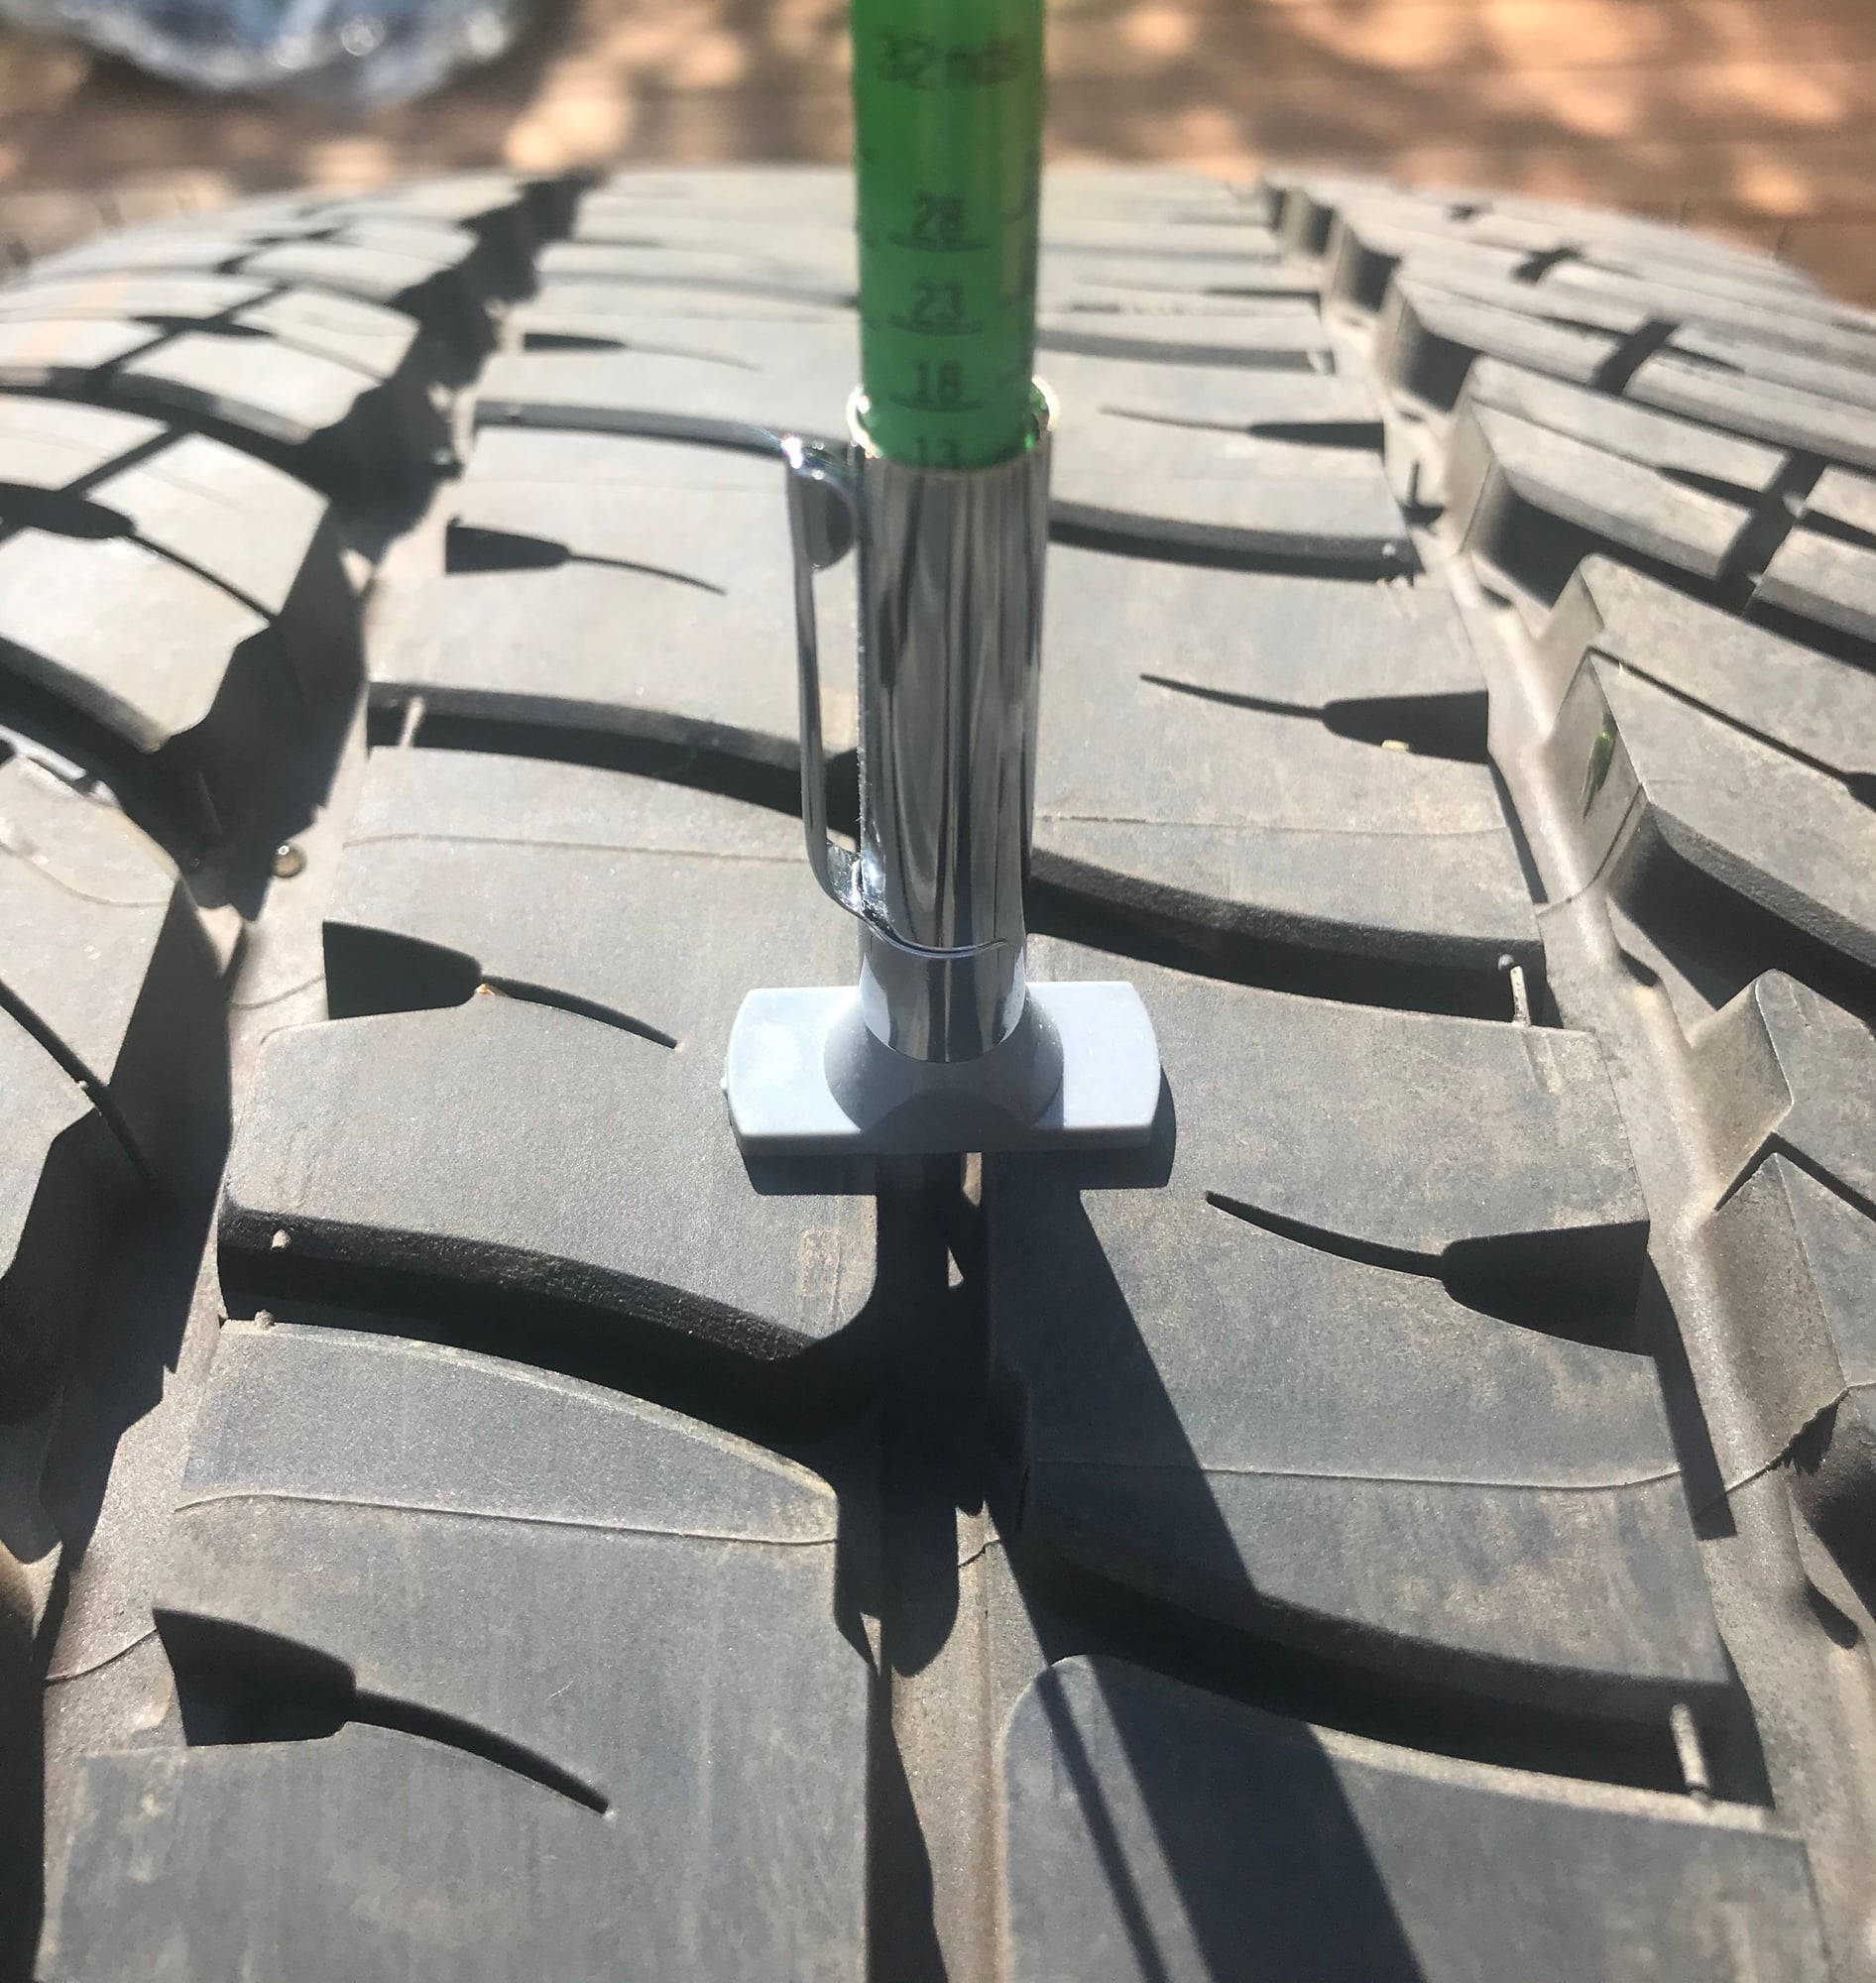 Wheels and Tires/Axles - Brand New Michelin LTX AT/2 275/70/18 - New - Brighton, CO 80601, United States